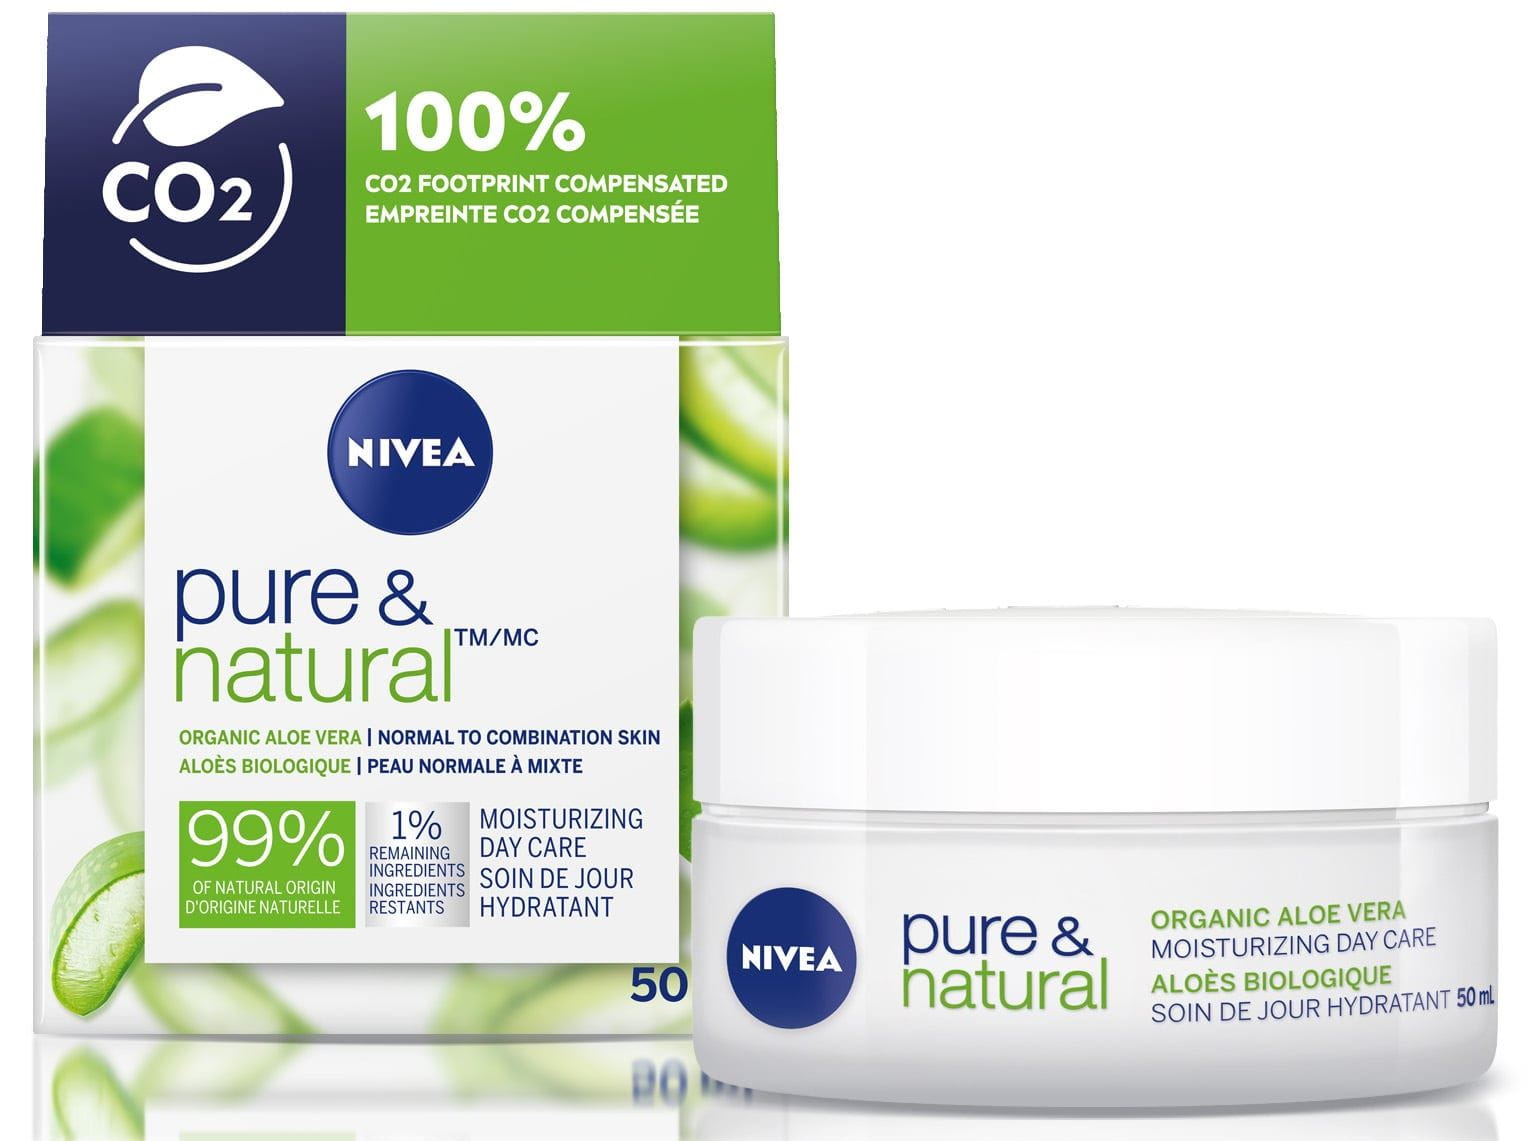 View of the Nivea Pure and Natural Organic Aloe Vera Moisturizing Day Cream product with product packaging shown against a white background.